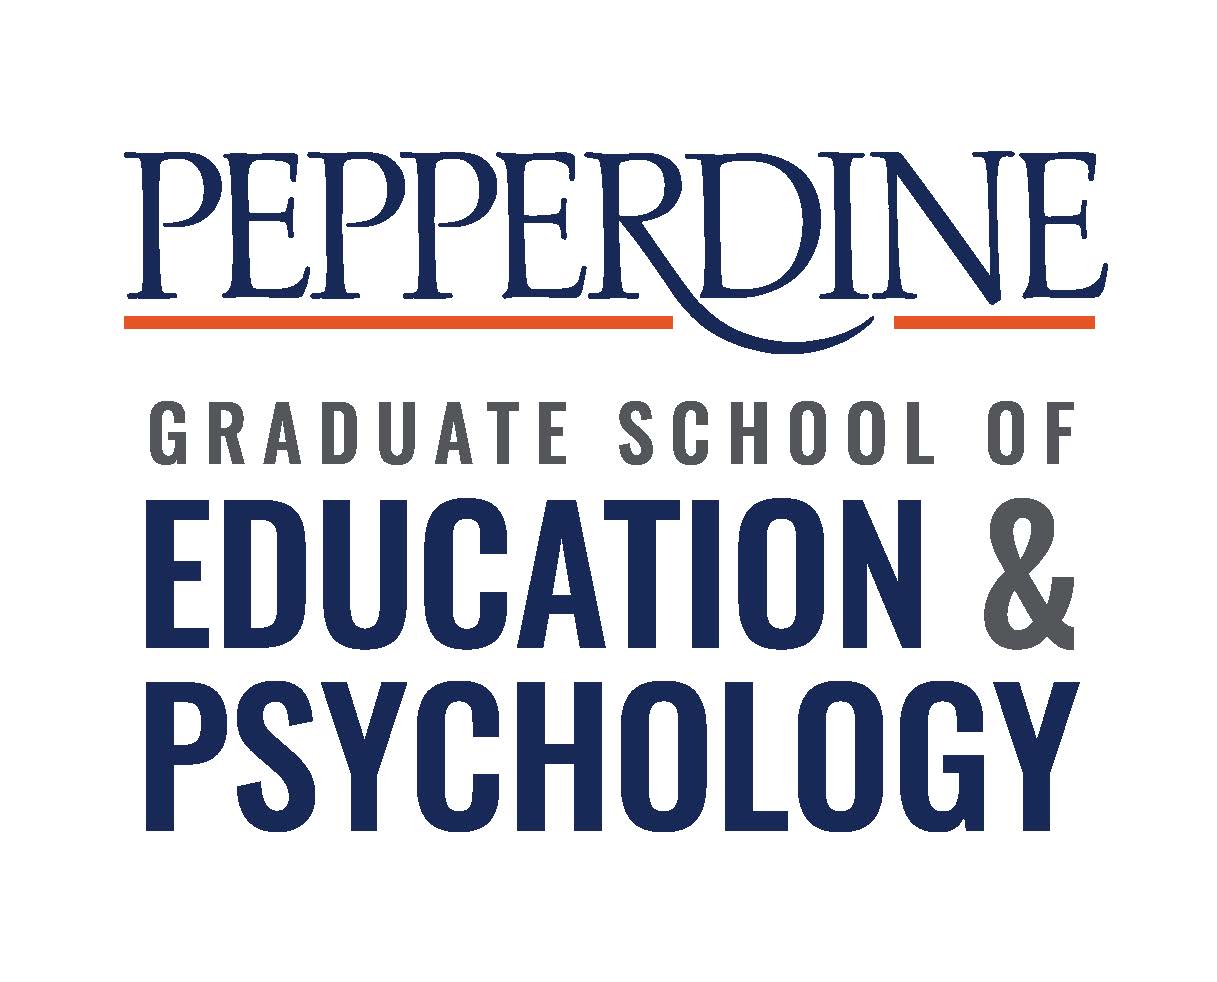 StageClip "Pepperdine Graduate School of Education and Psychology"